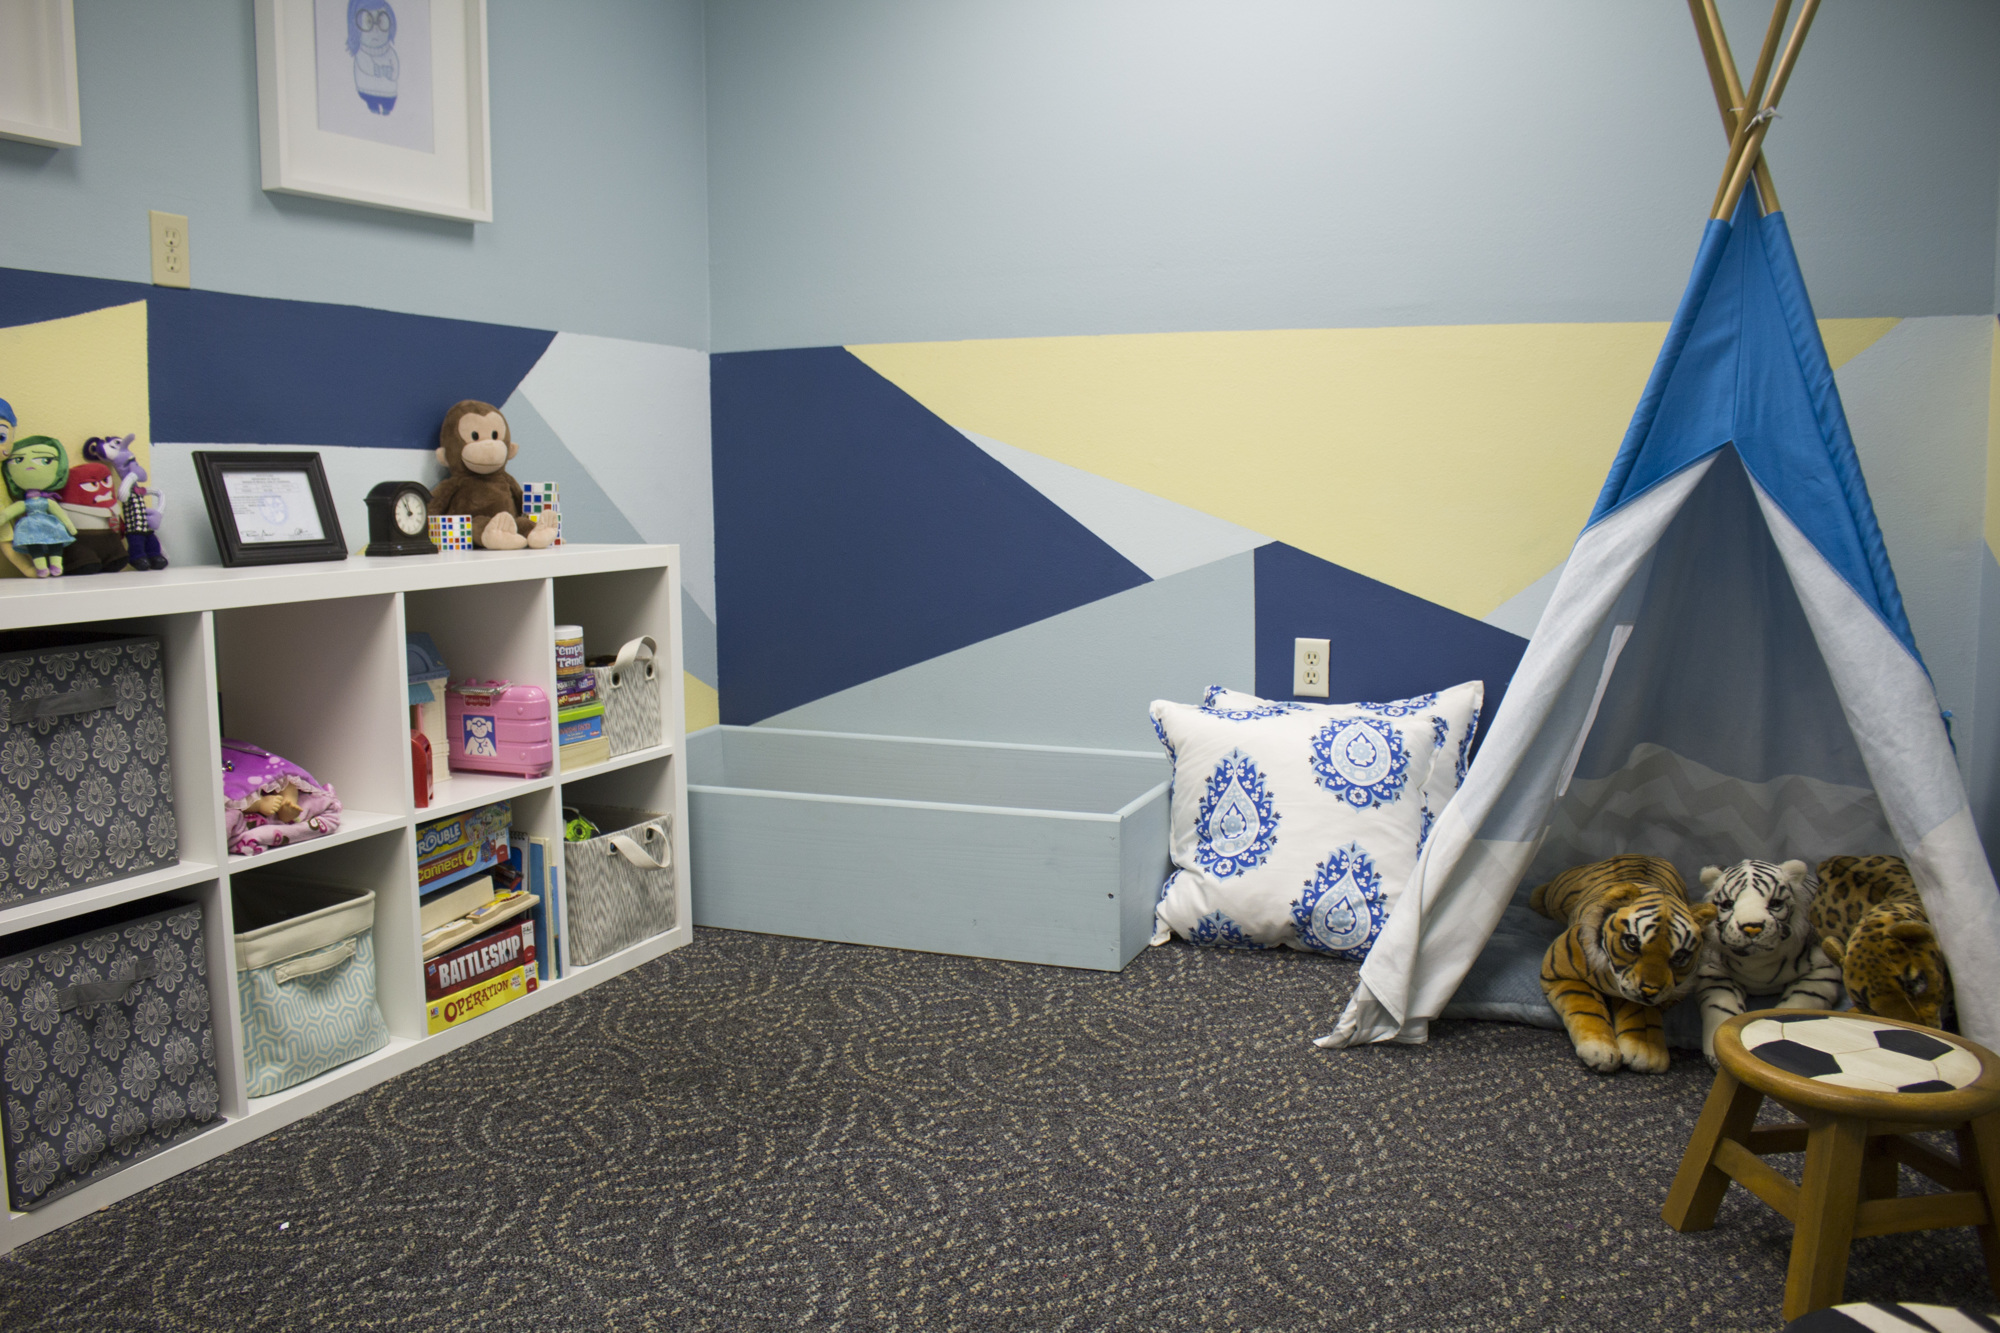 One of the newly added play rooms for children.